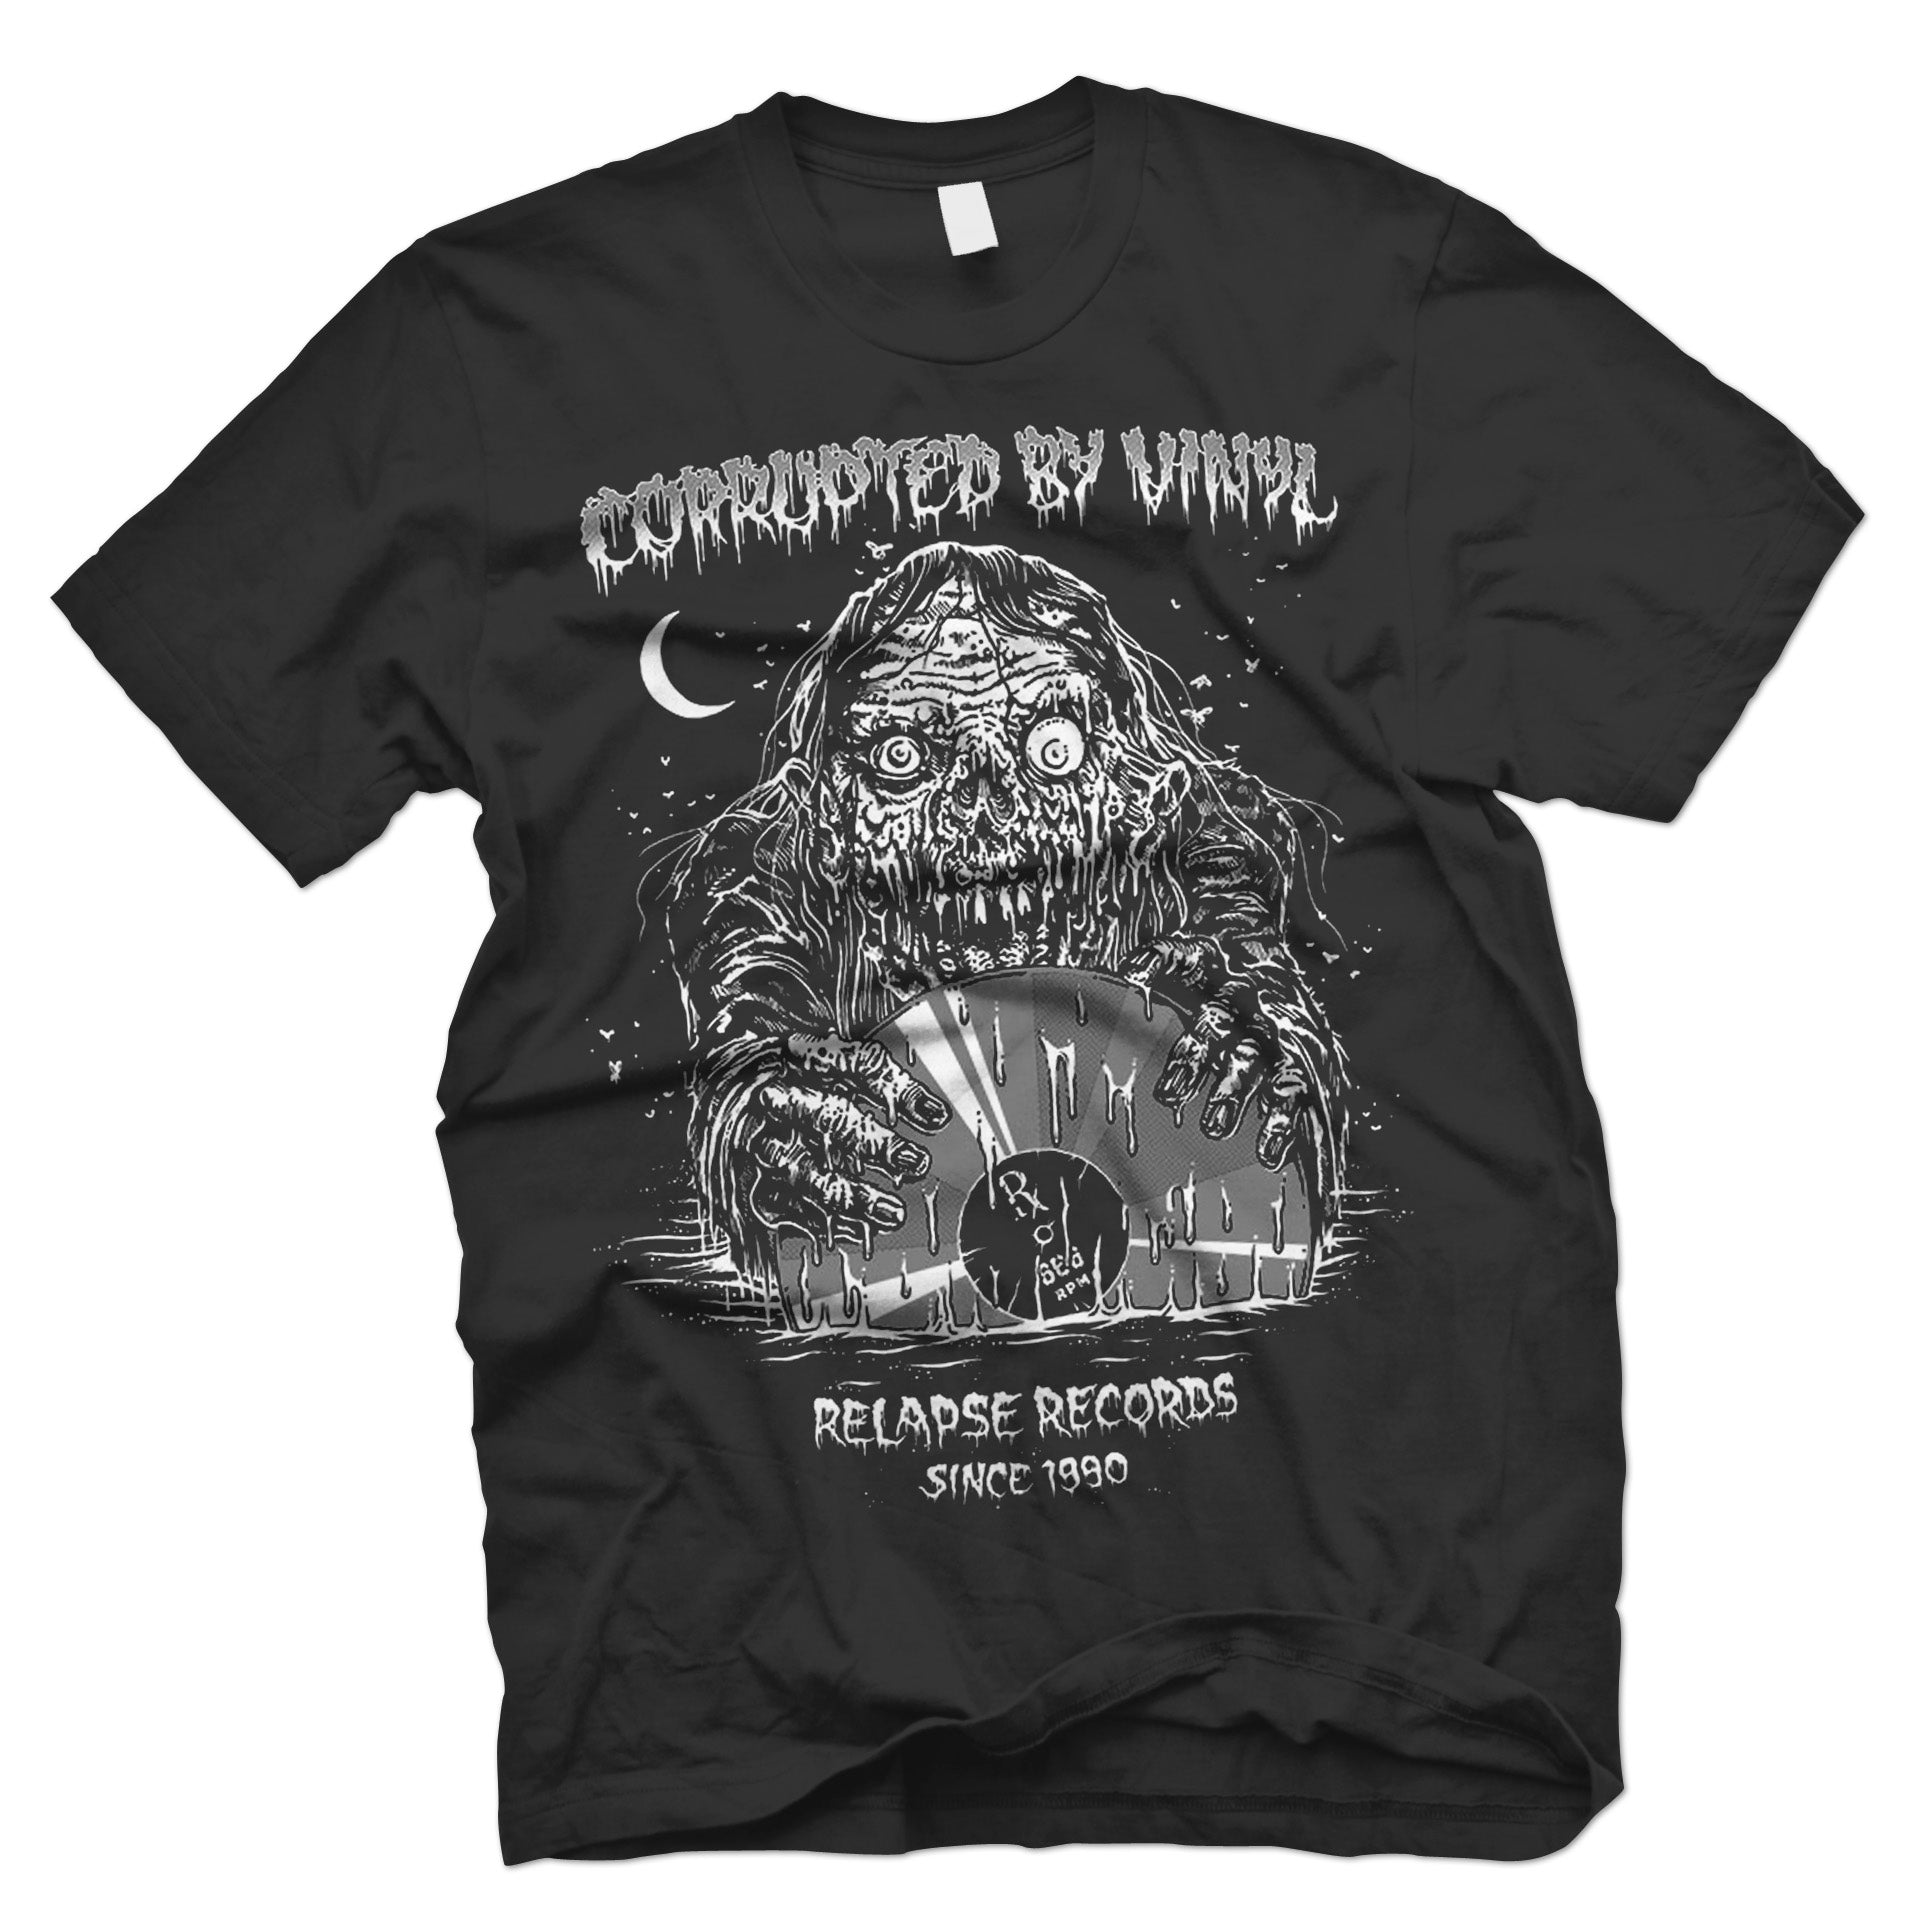 Relapse Records "Corrupted By Vinyl" T-Shirt